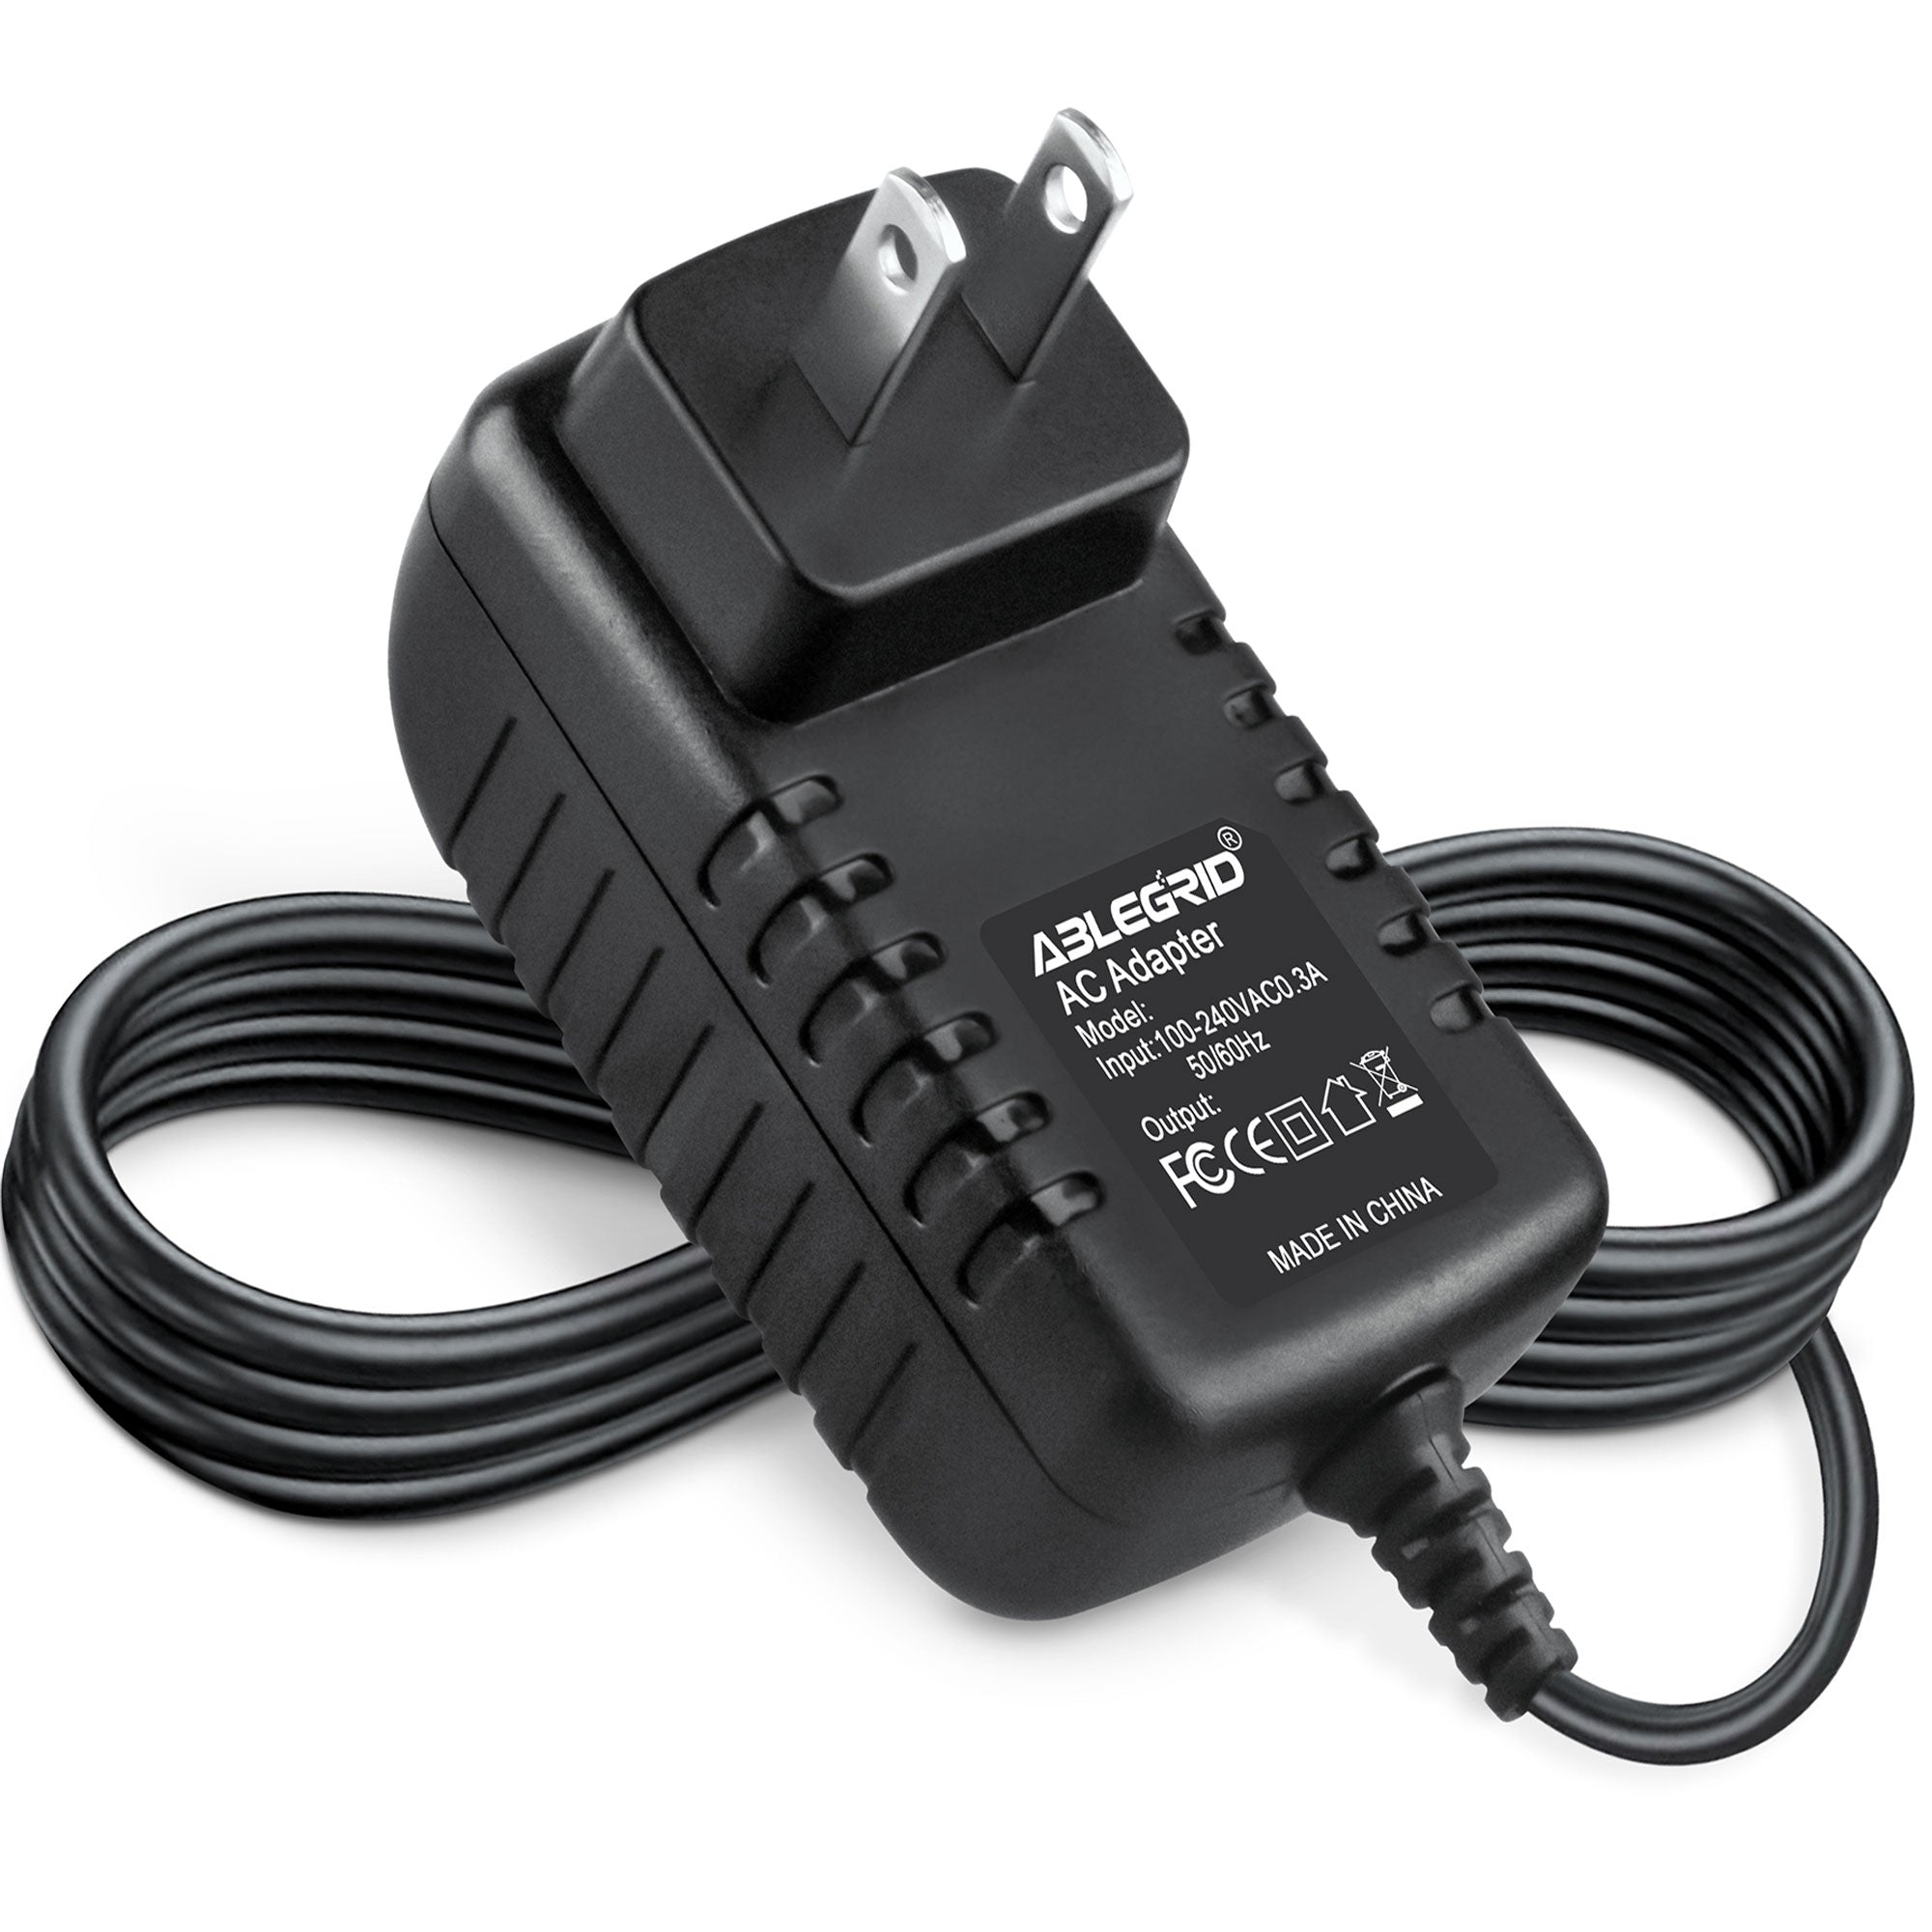 AbleGrid AC-DC Adapter for Remington Model No.: PA-1204N PA1204N SIL Class 2 Power Supply Cord Cable PS Battery Charger Mains PSU (with Barrel Round Plug Tip.)